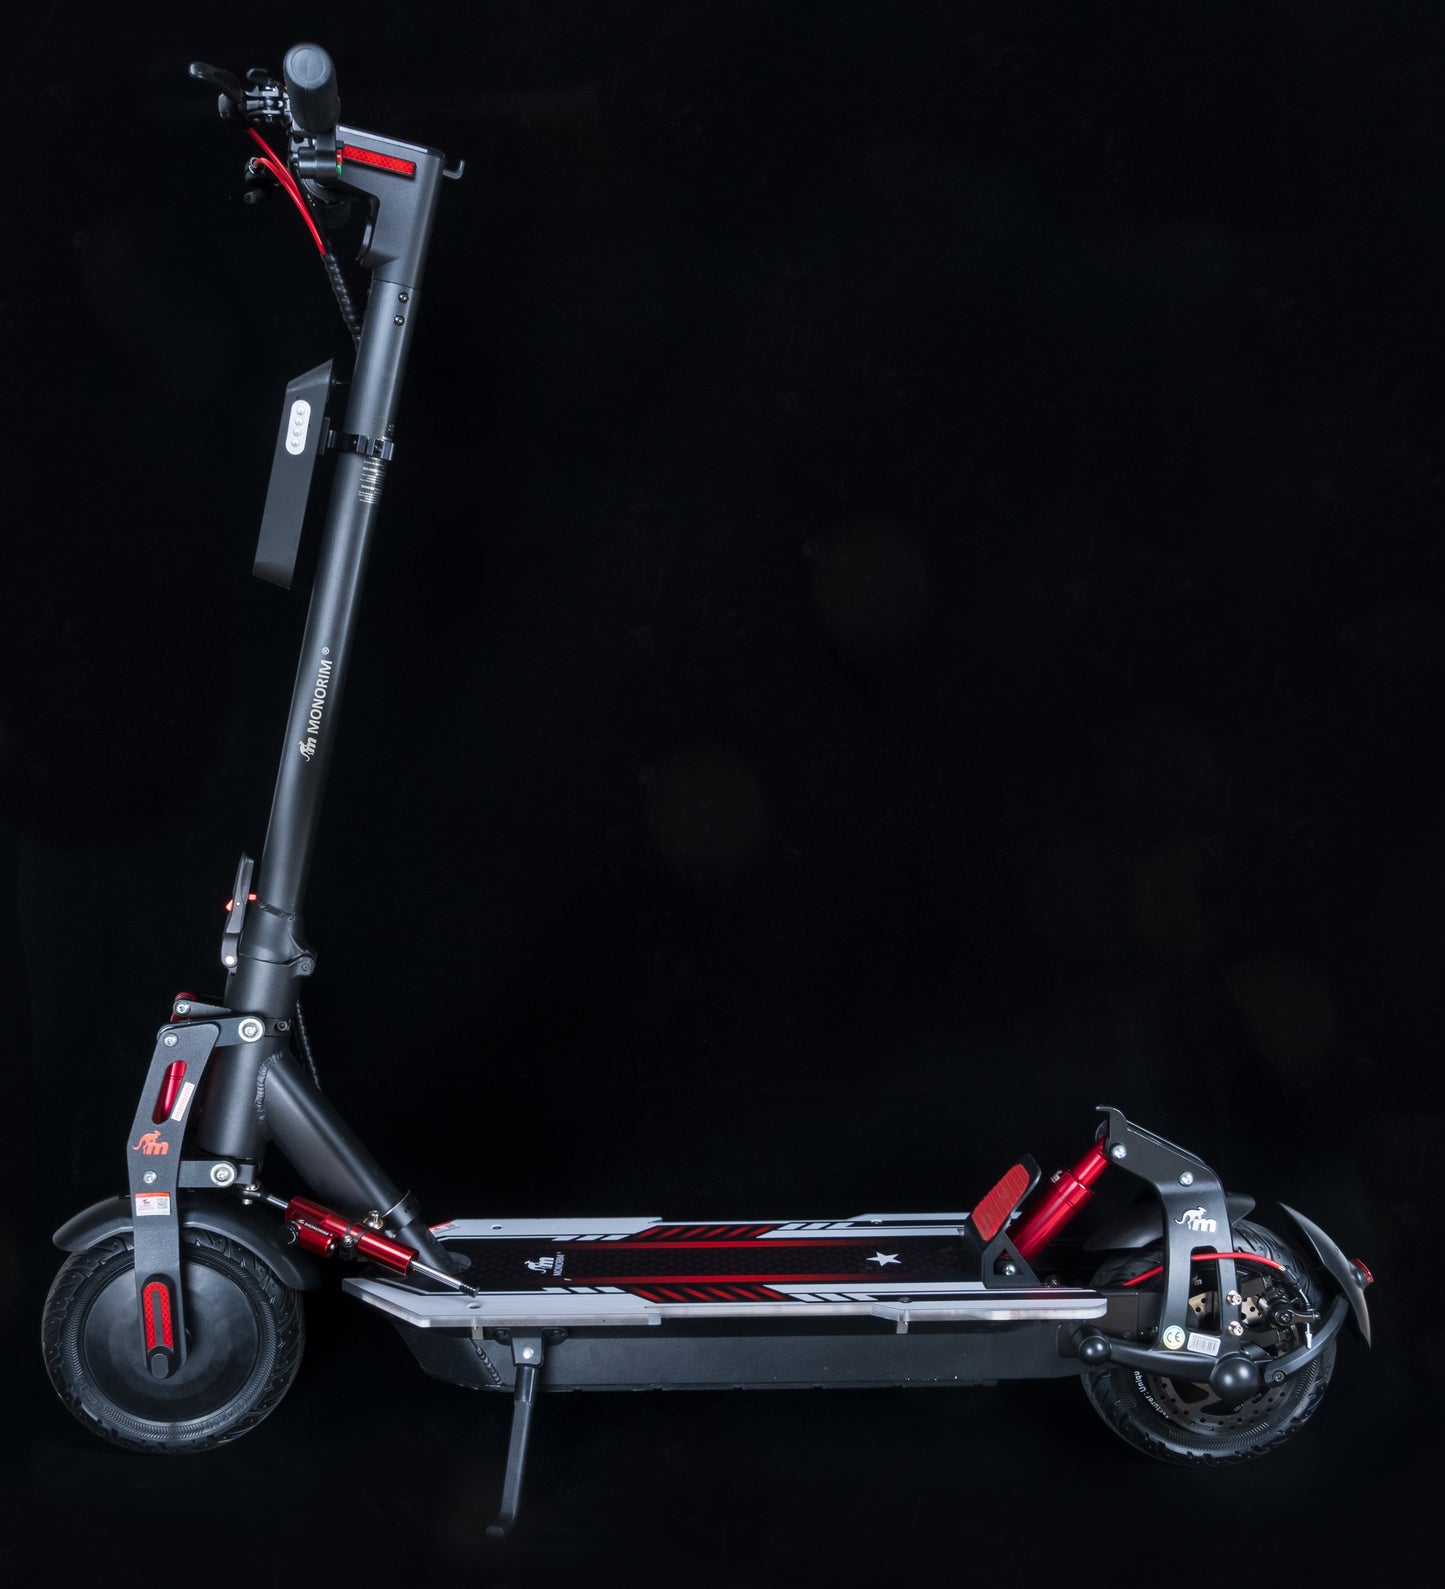 Monorim SUV S1  48v LS/NLpower  Cells Batteries 1000w Dual drive electric scooter (external handle bar 500mm ) 2022year best city of road killer option model(without shipcost)